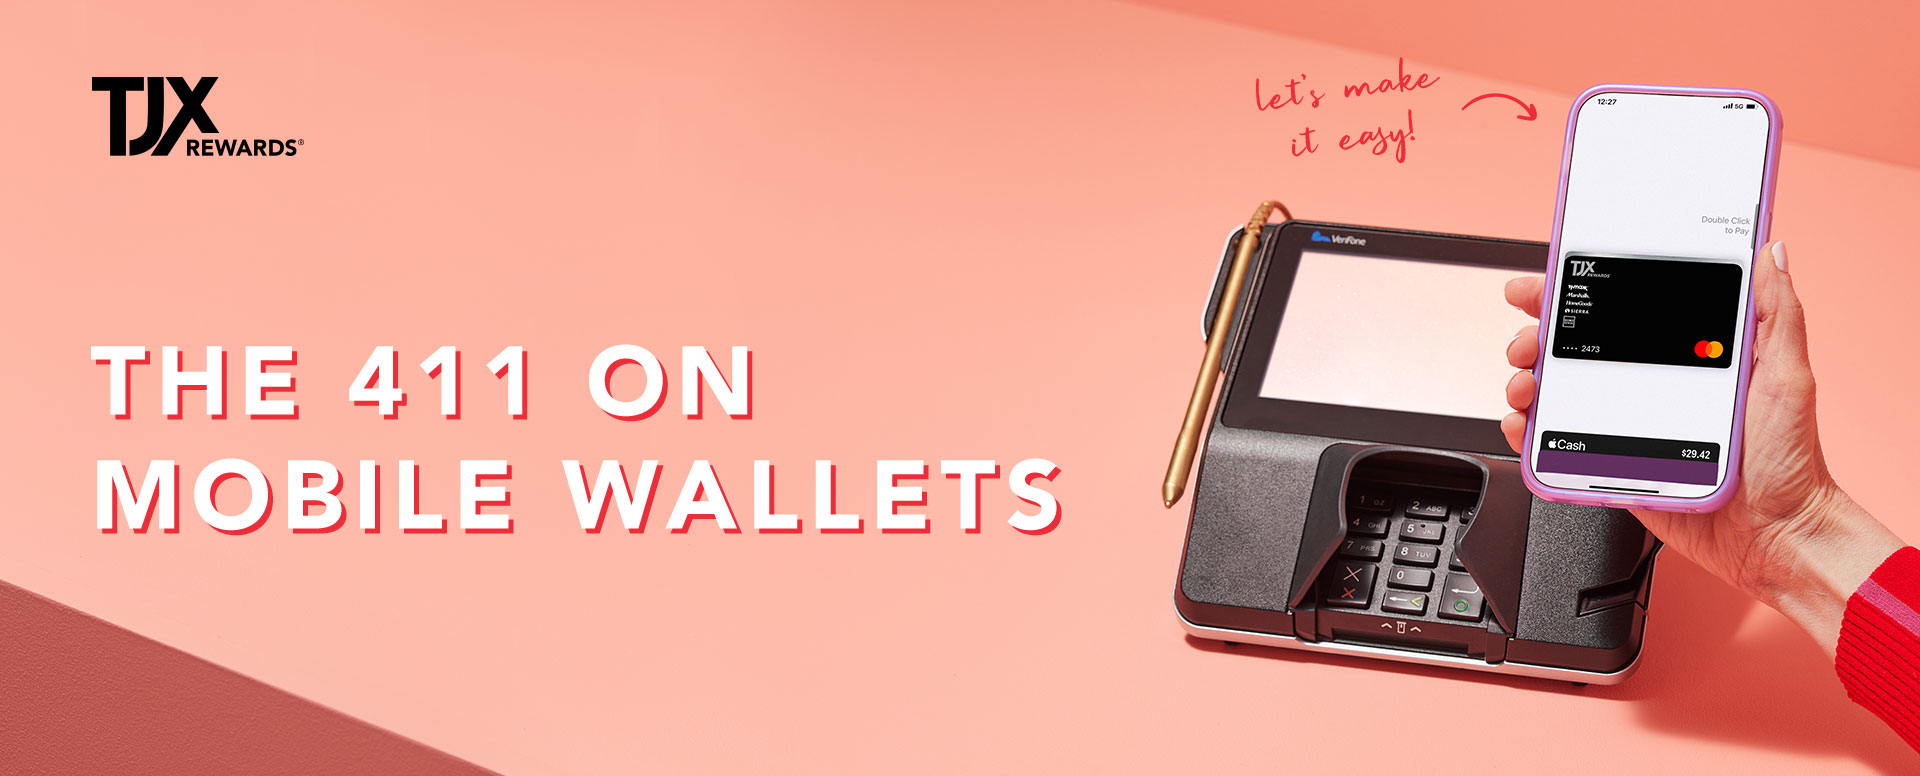 the 411 on digial wallets